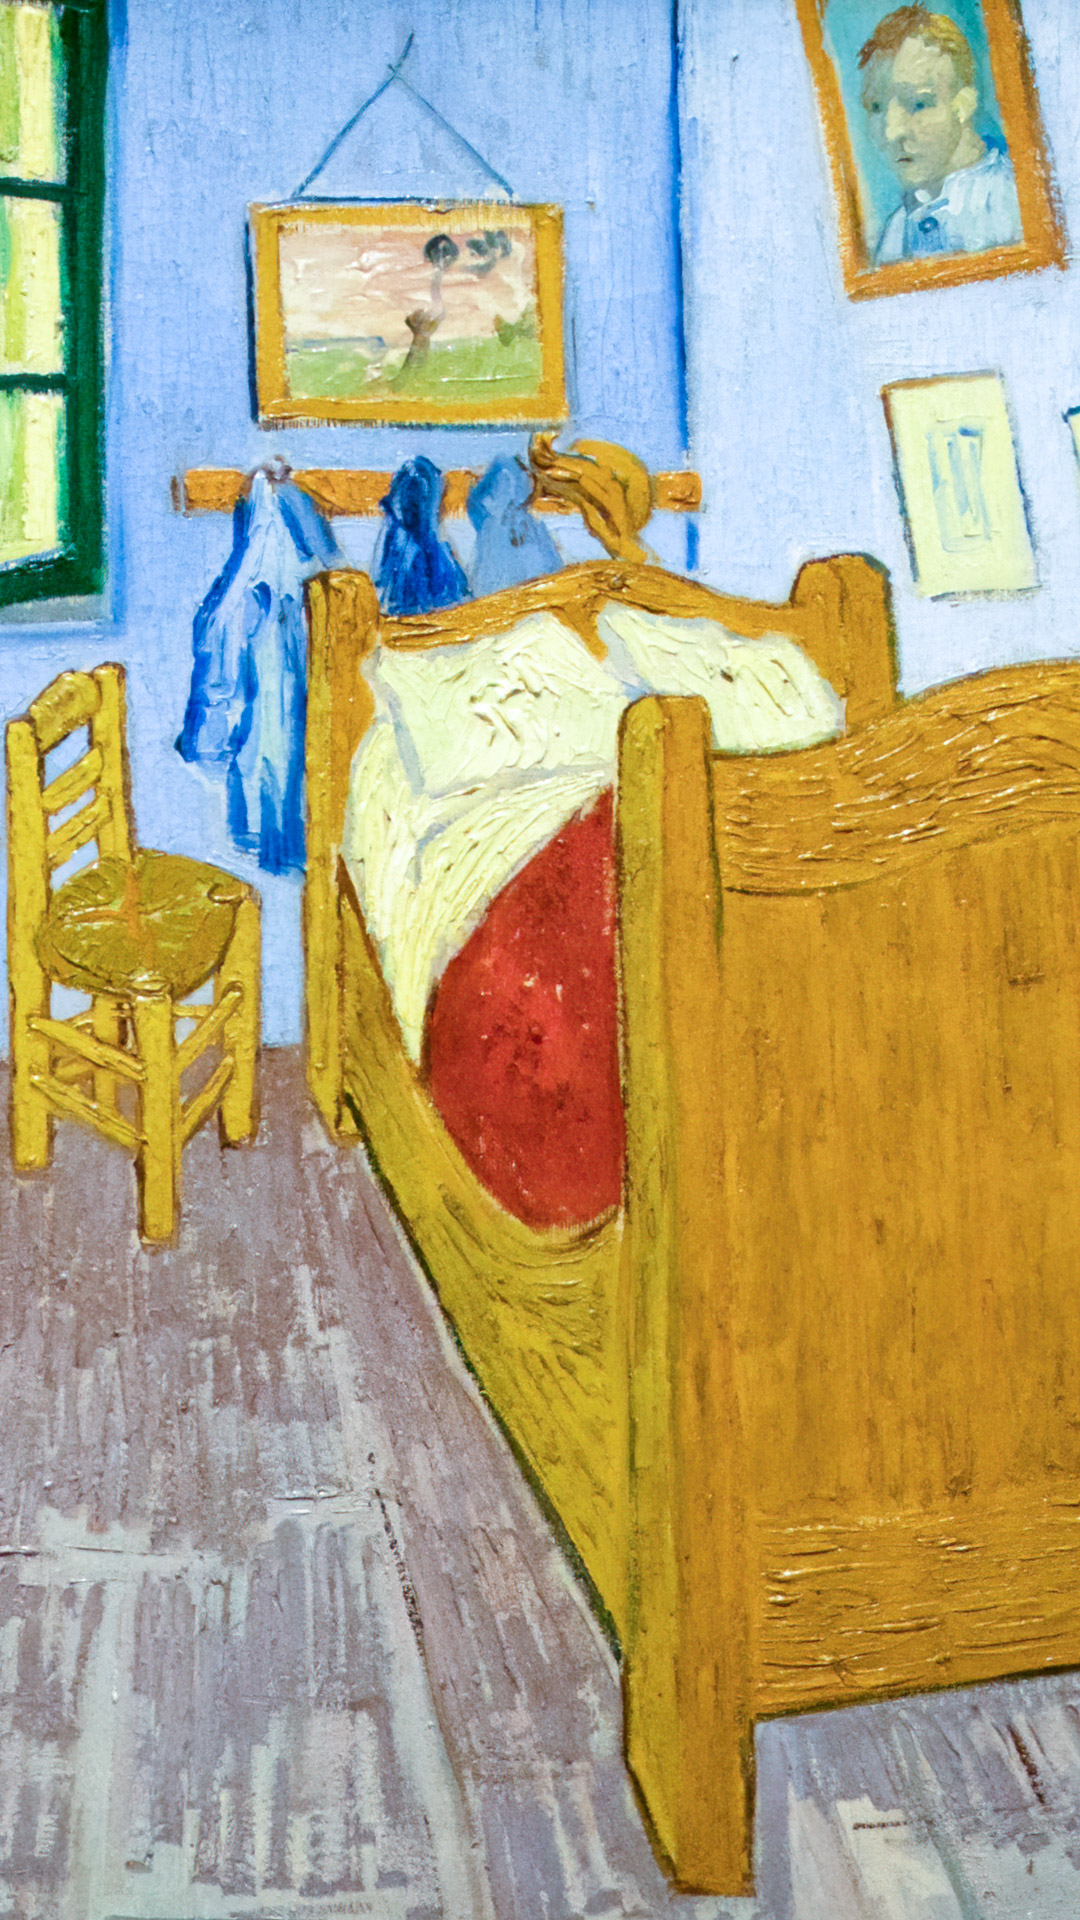 Experience the tranquility of Vincent van Gogh's bedroom at Arles through our captivating Impressionism wallpapers.